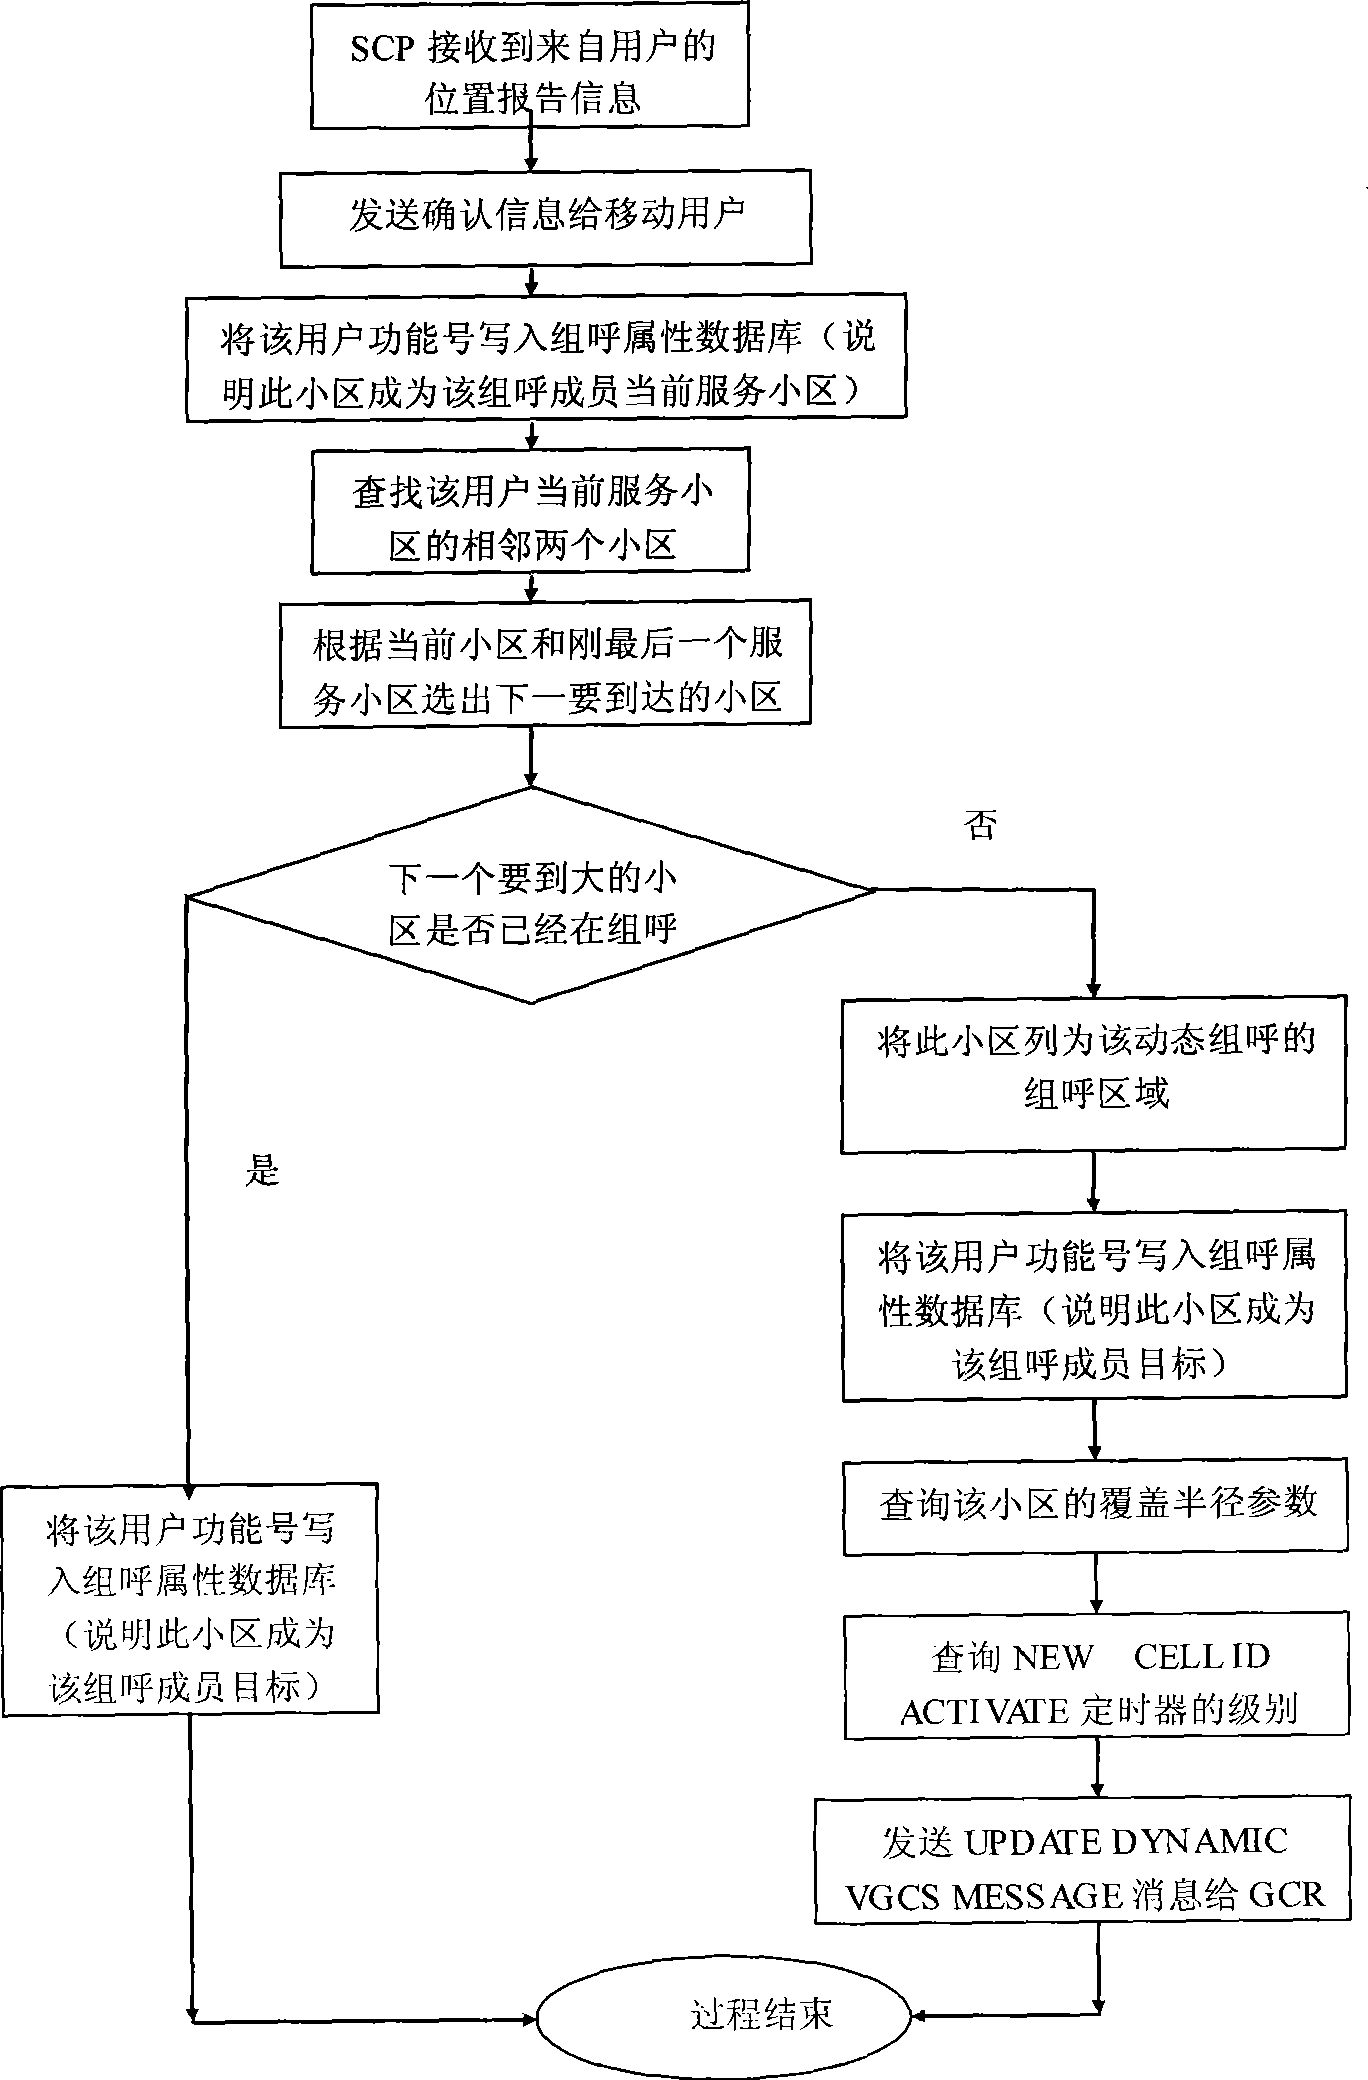 Establishing and updating method for dynamic voice group call region